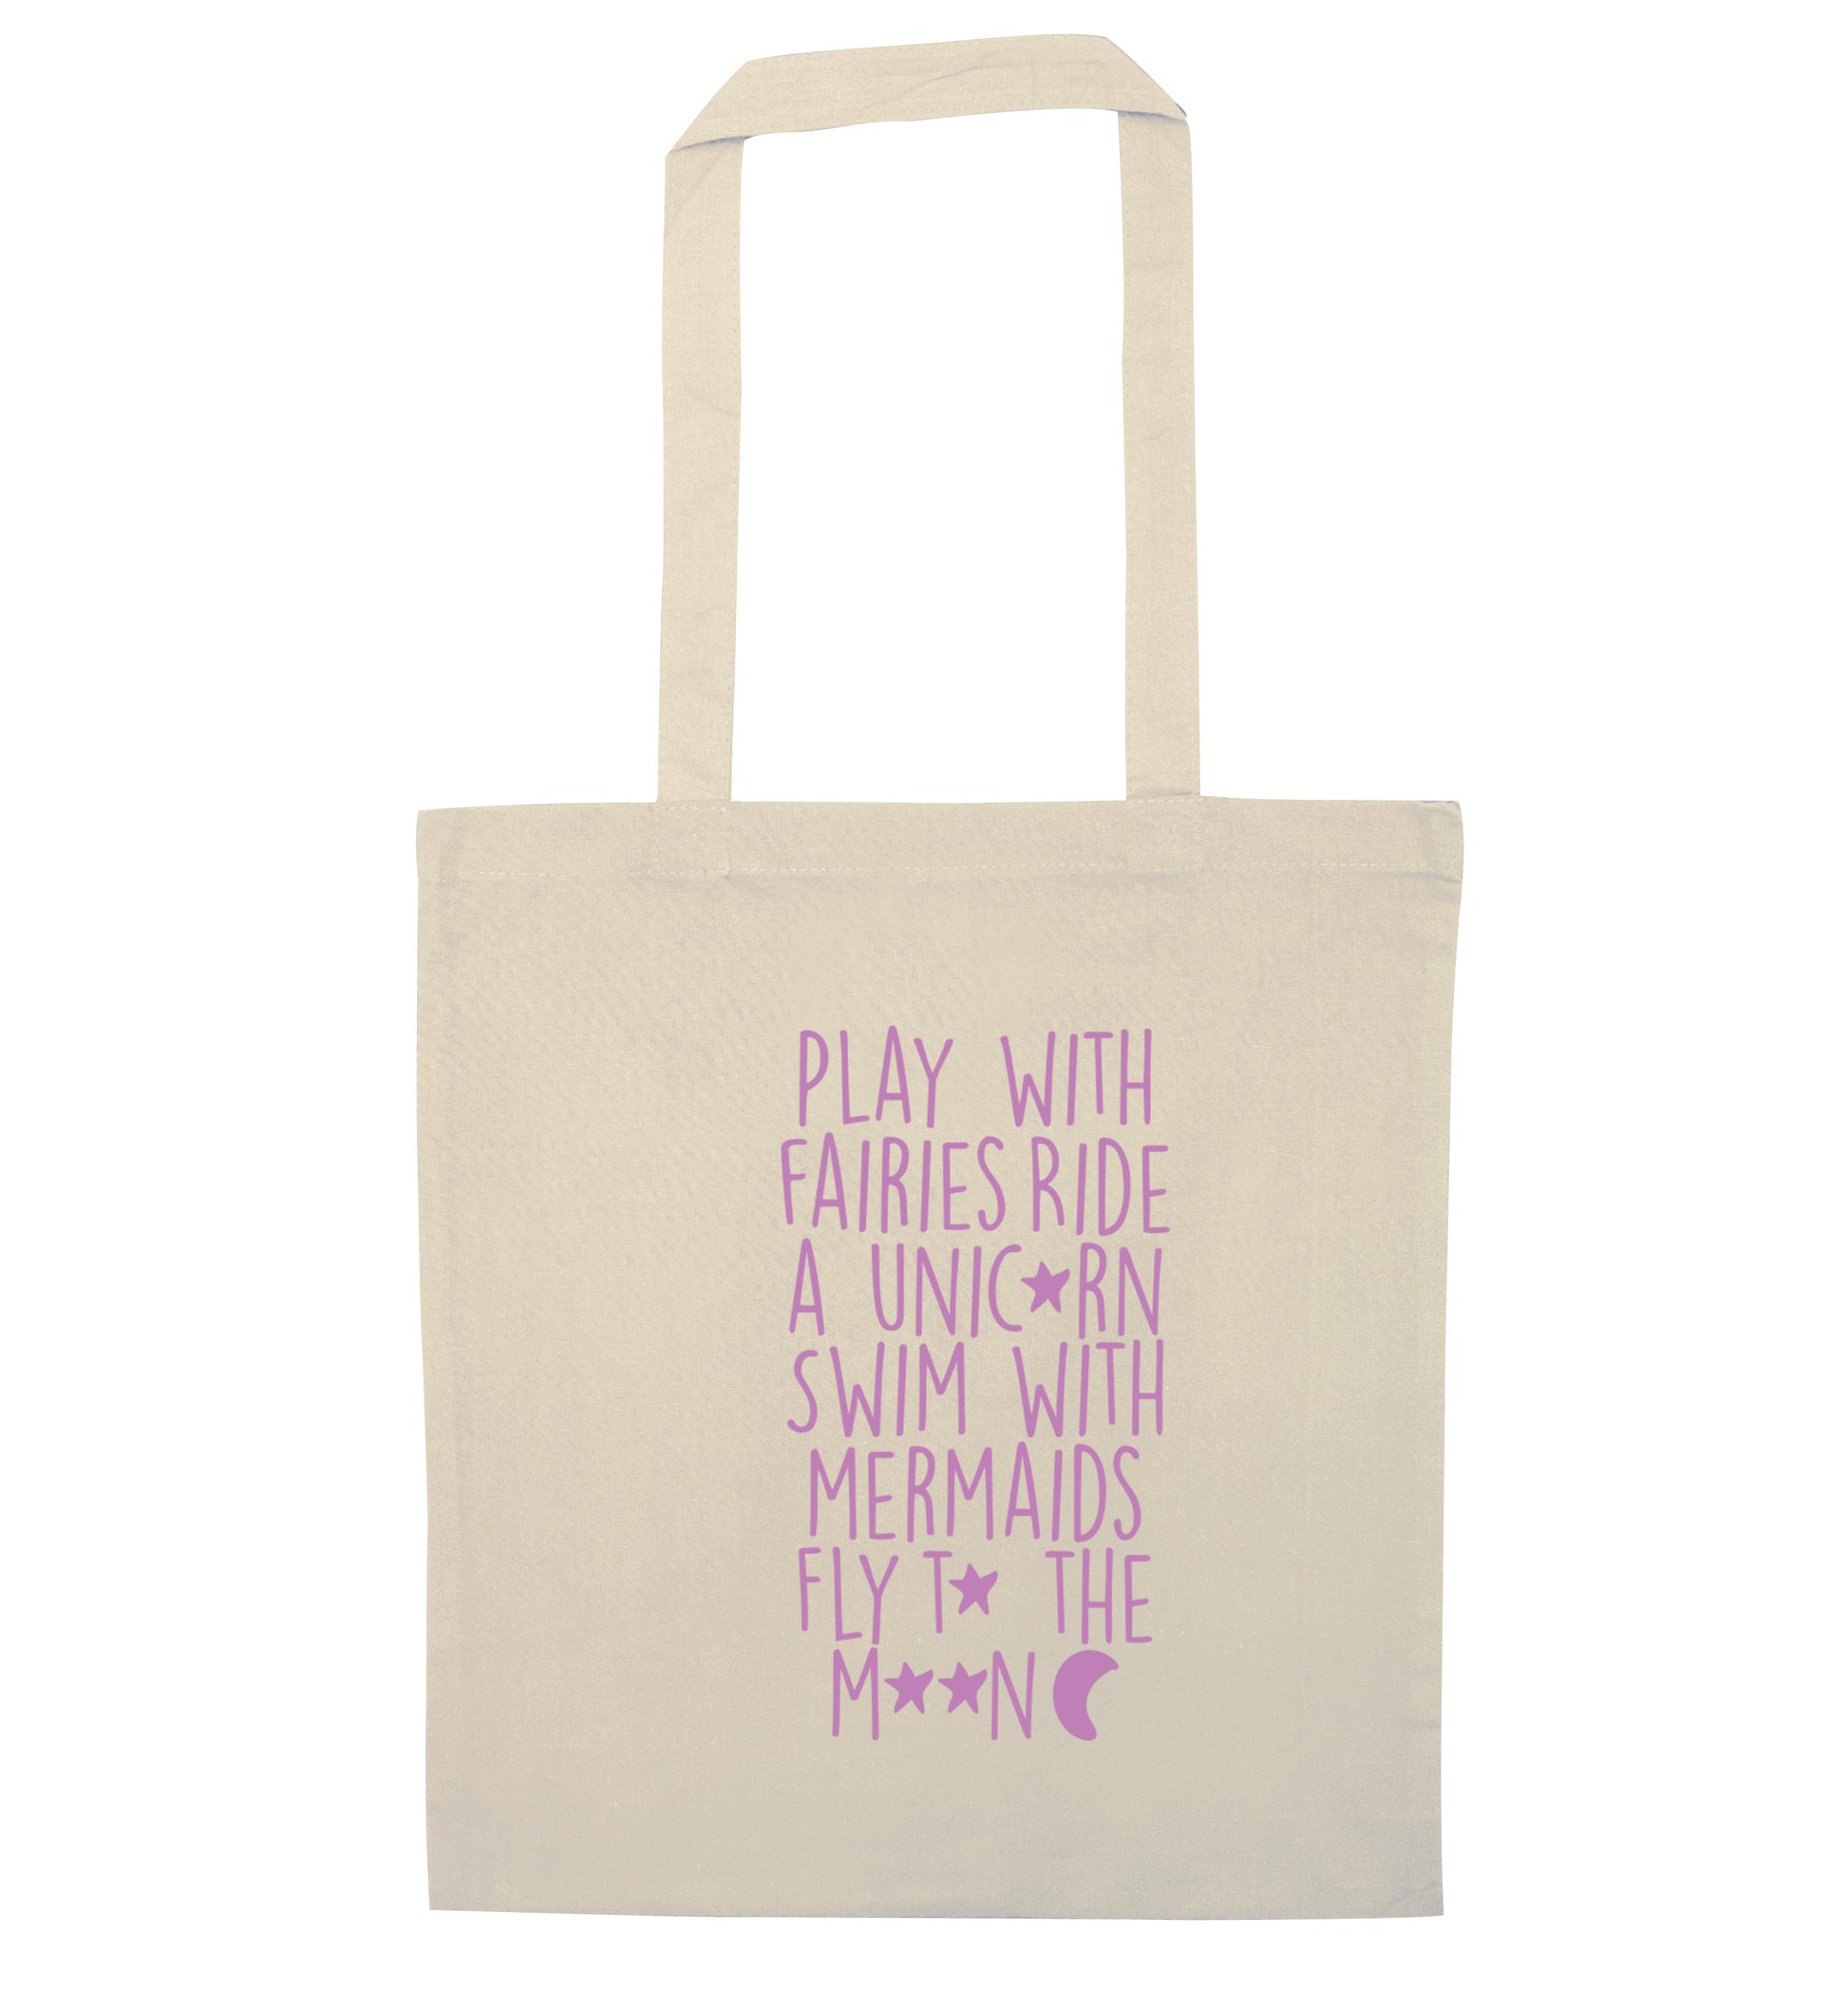 Play with fairies ride a unicorn swim with mermaids fly to the moon natural tote bag